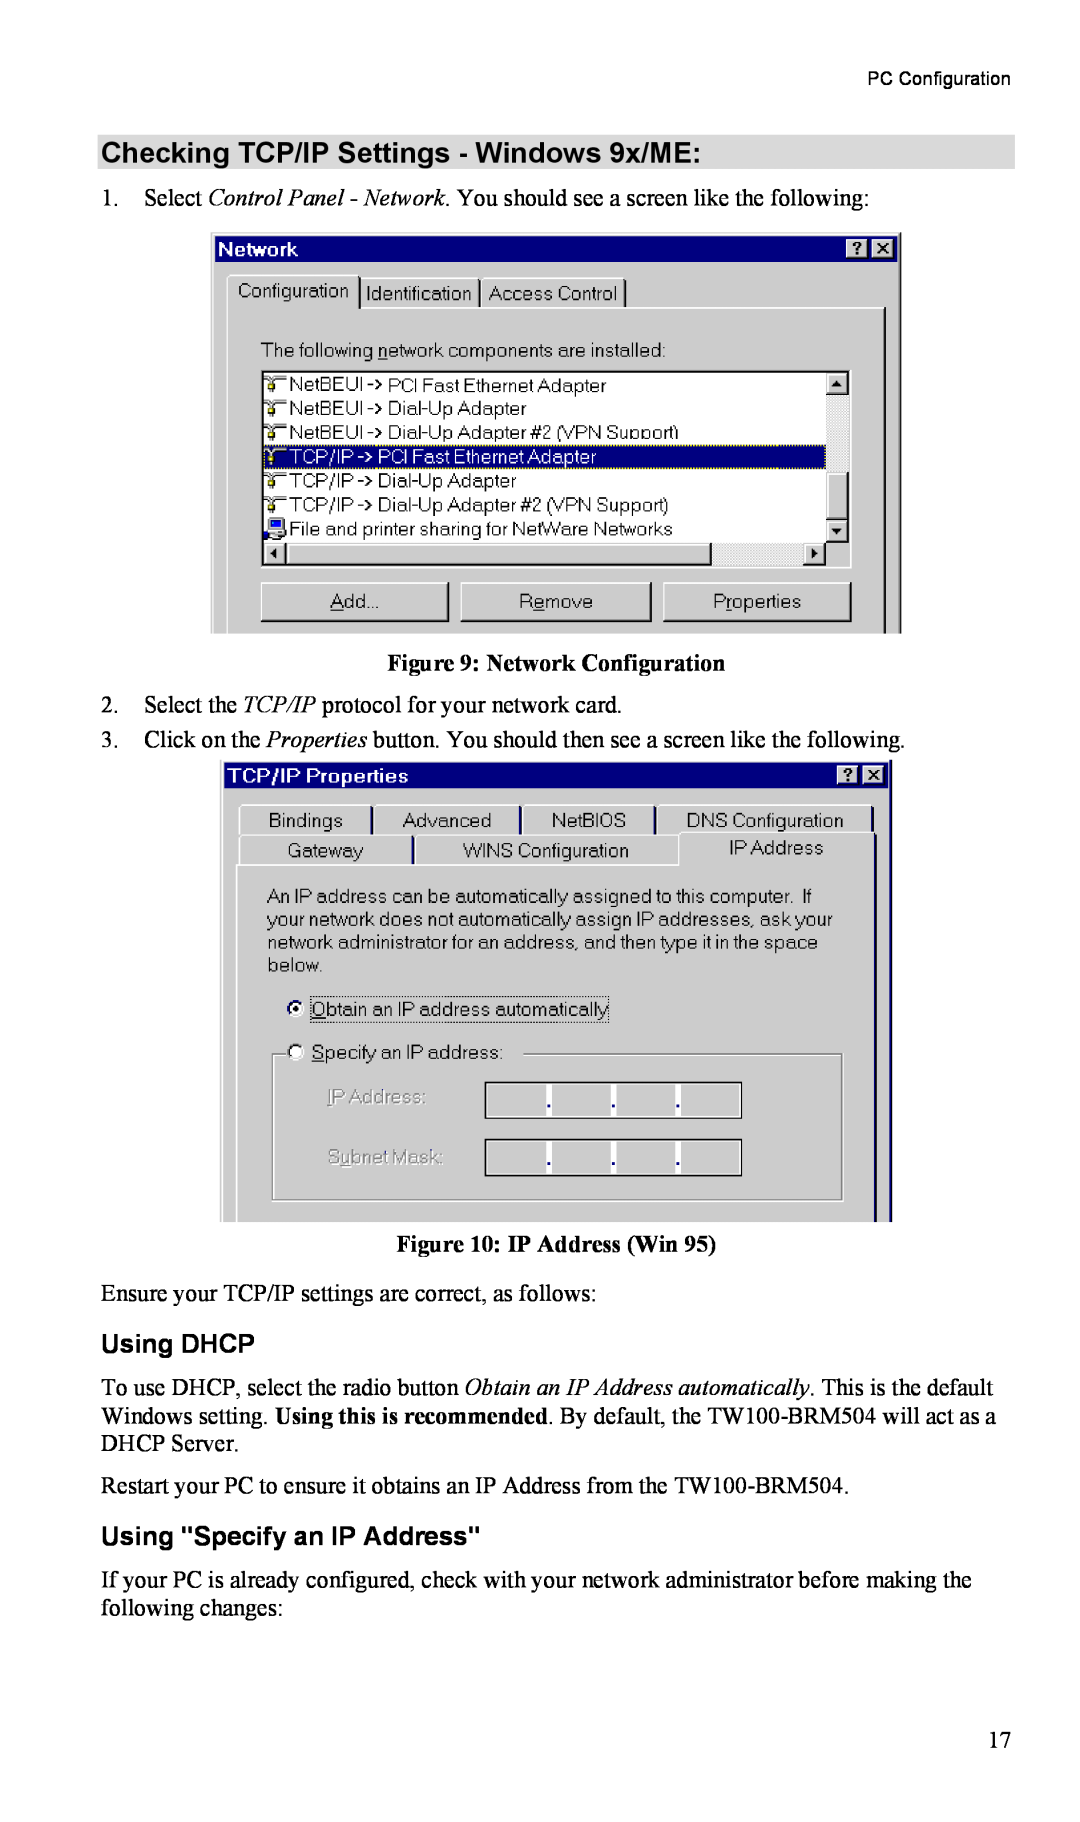 TRENDnet TW100-BRM504 manual Checking TCP/IP Settings - Windows 9x/ME, Using DHCP, Using Specify an IP Address 